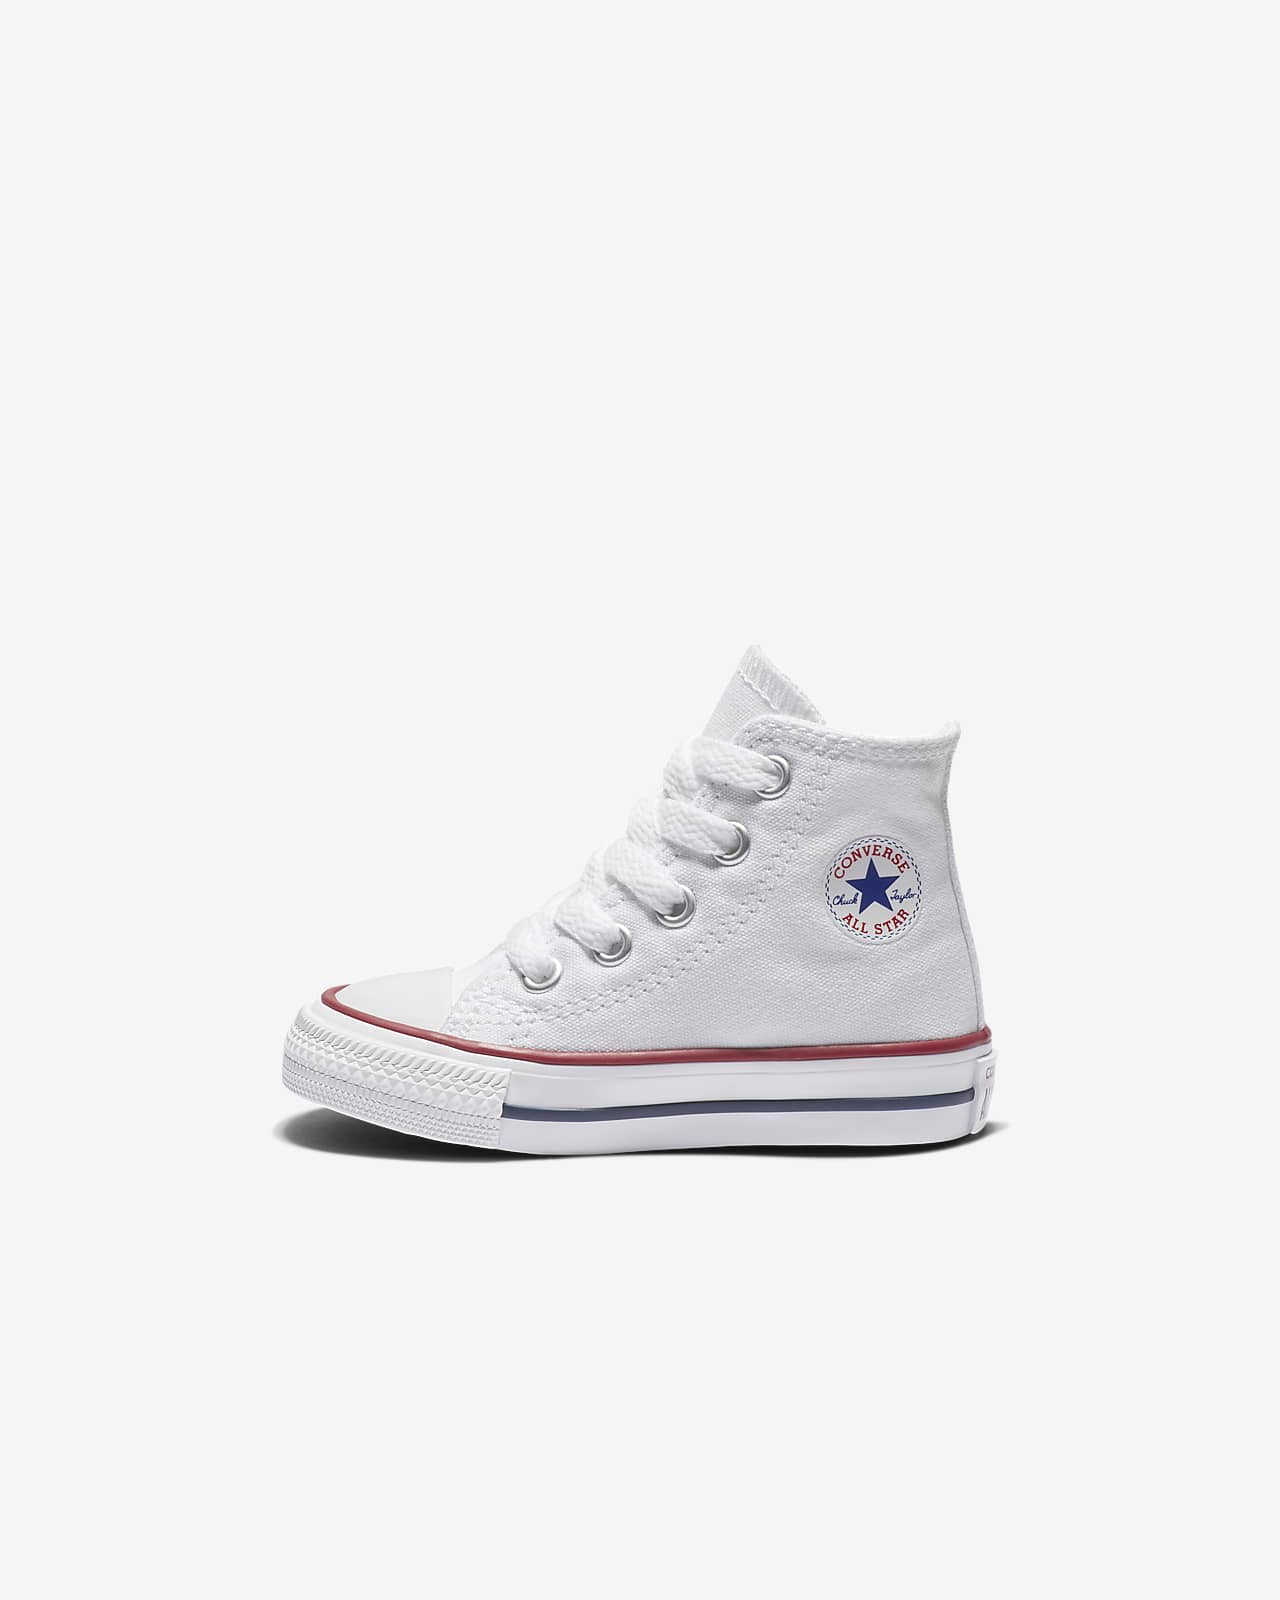 converse all star youth size chart